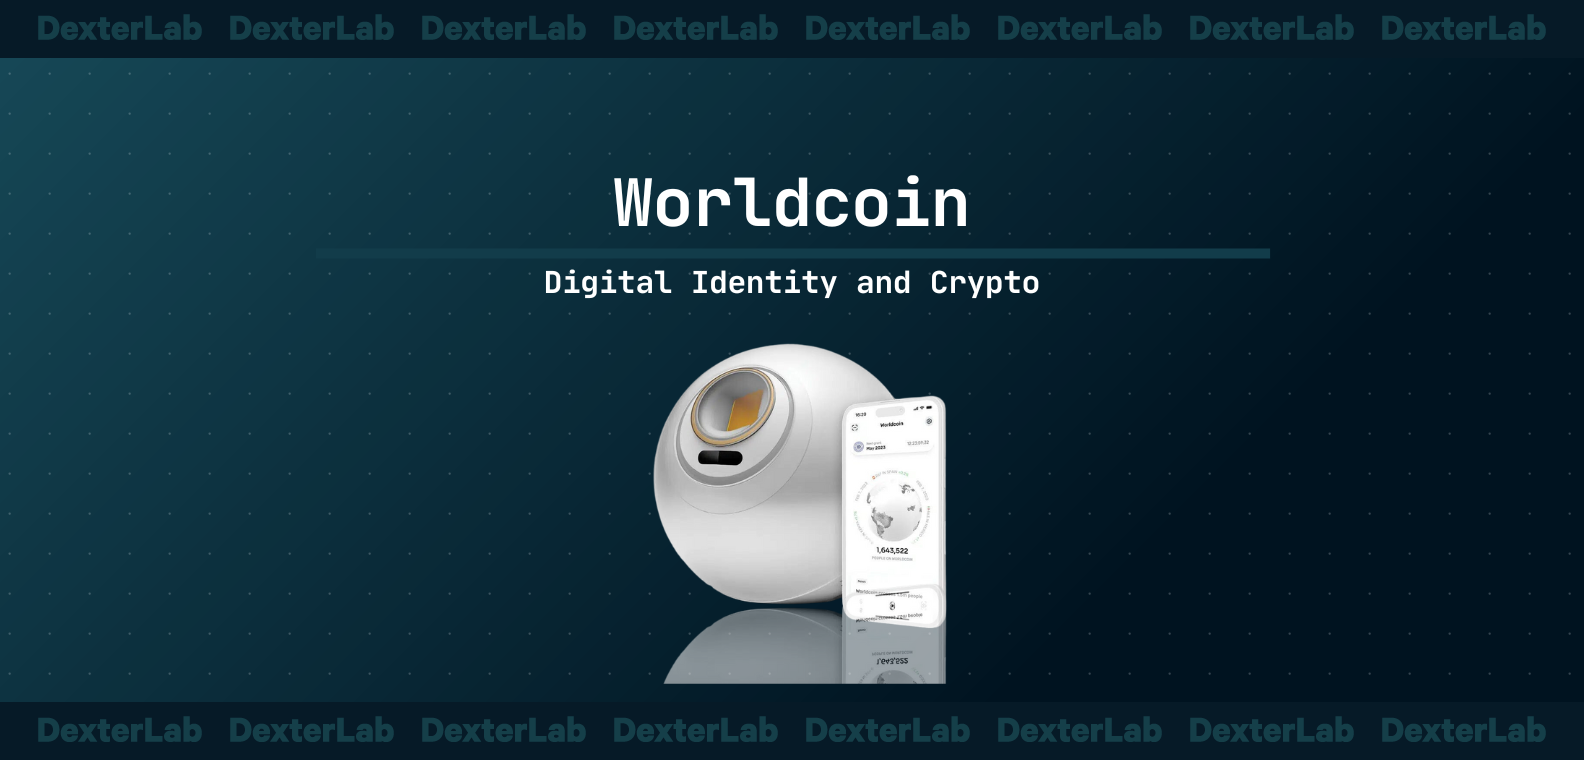 WorldCoin: Digital Identity and Crypto